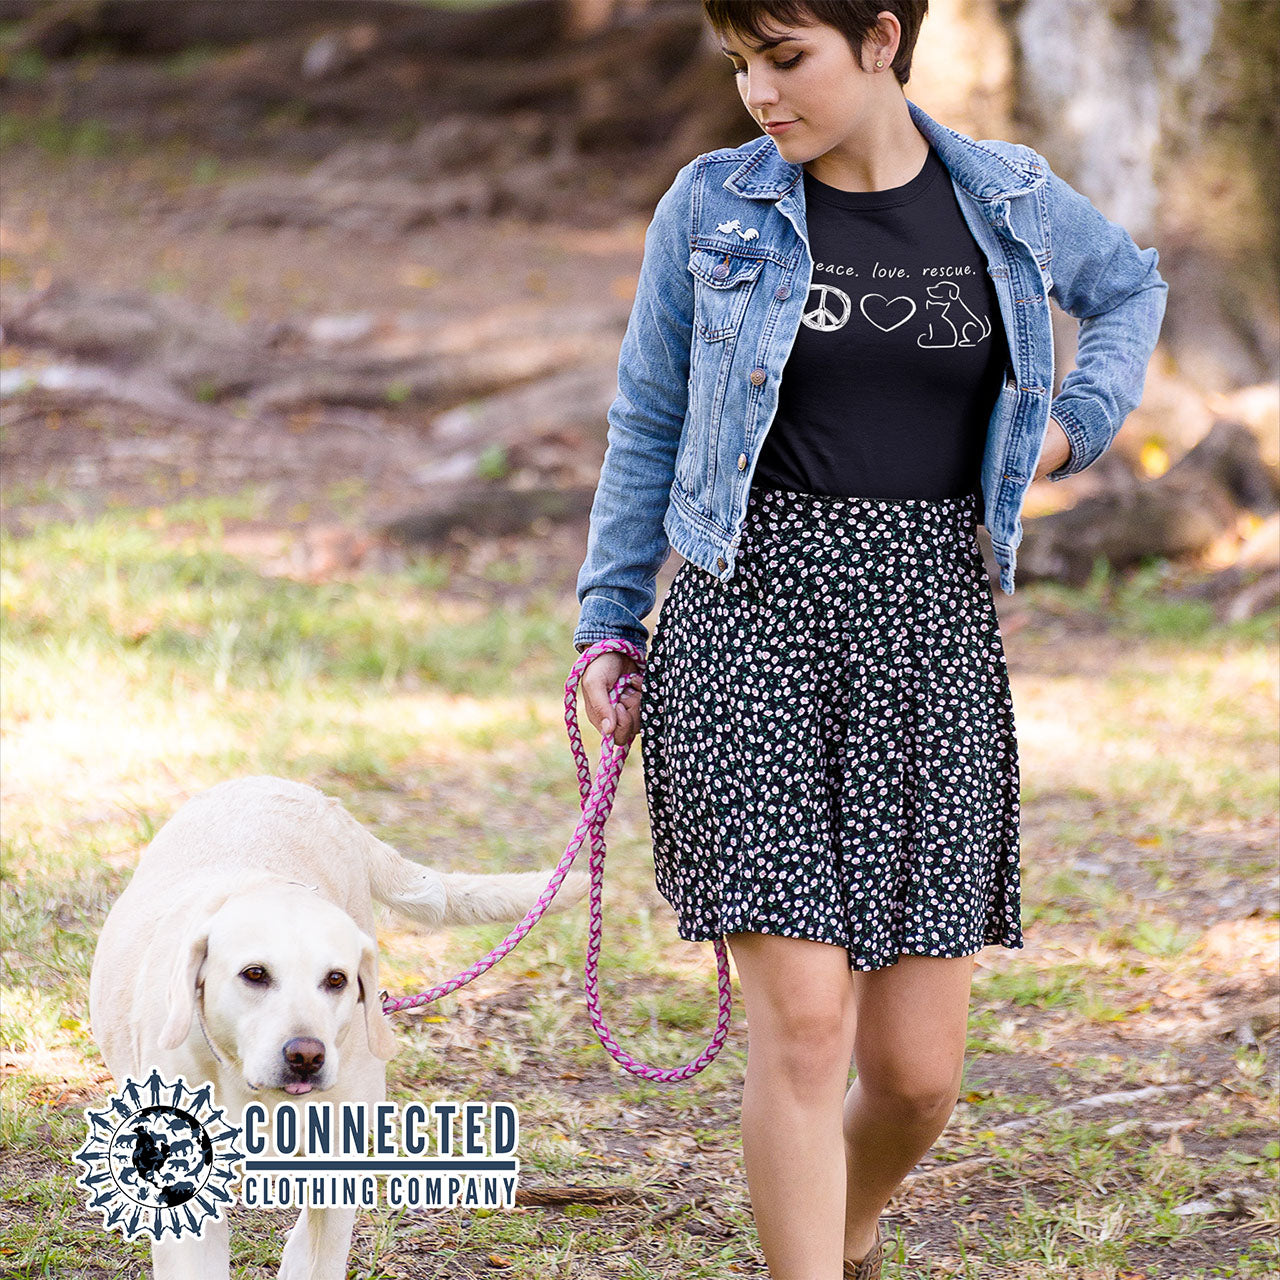 Model Walking Dog While Wearing Black Peace Love Rescue Short-Sleeve Tee - Connected Clothing Company - Ethically and Sustainably Made - 10% donated to Villalobos Animal Rescue Center